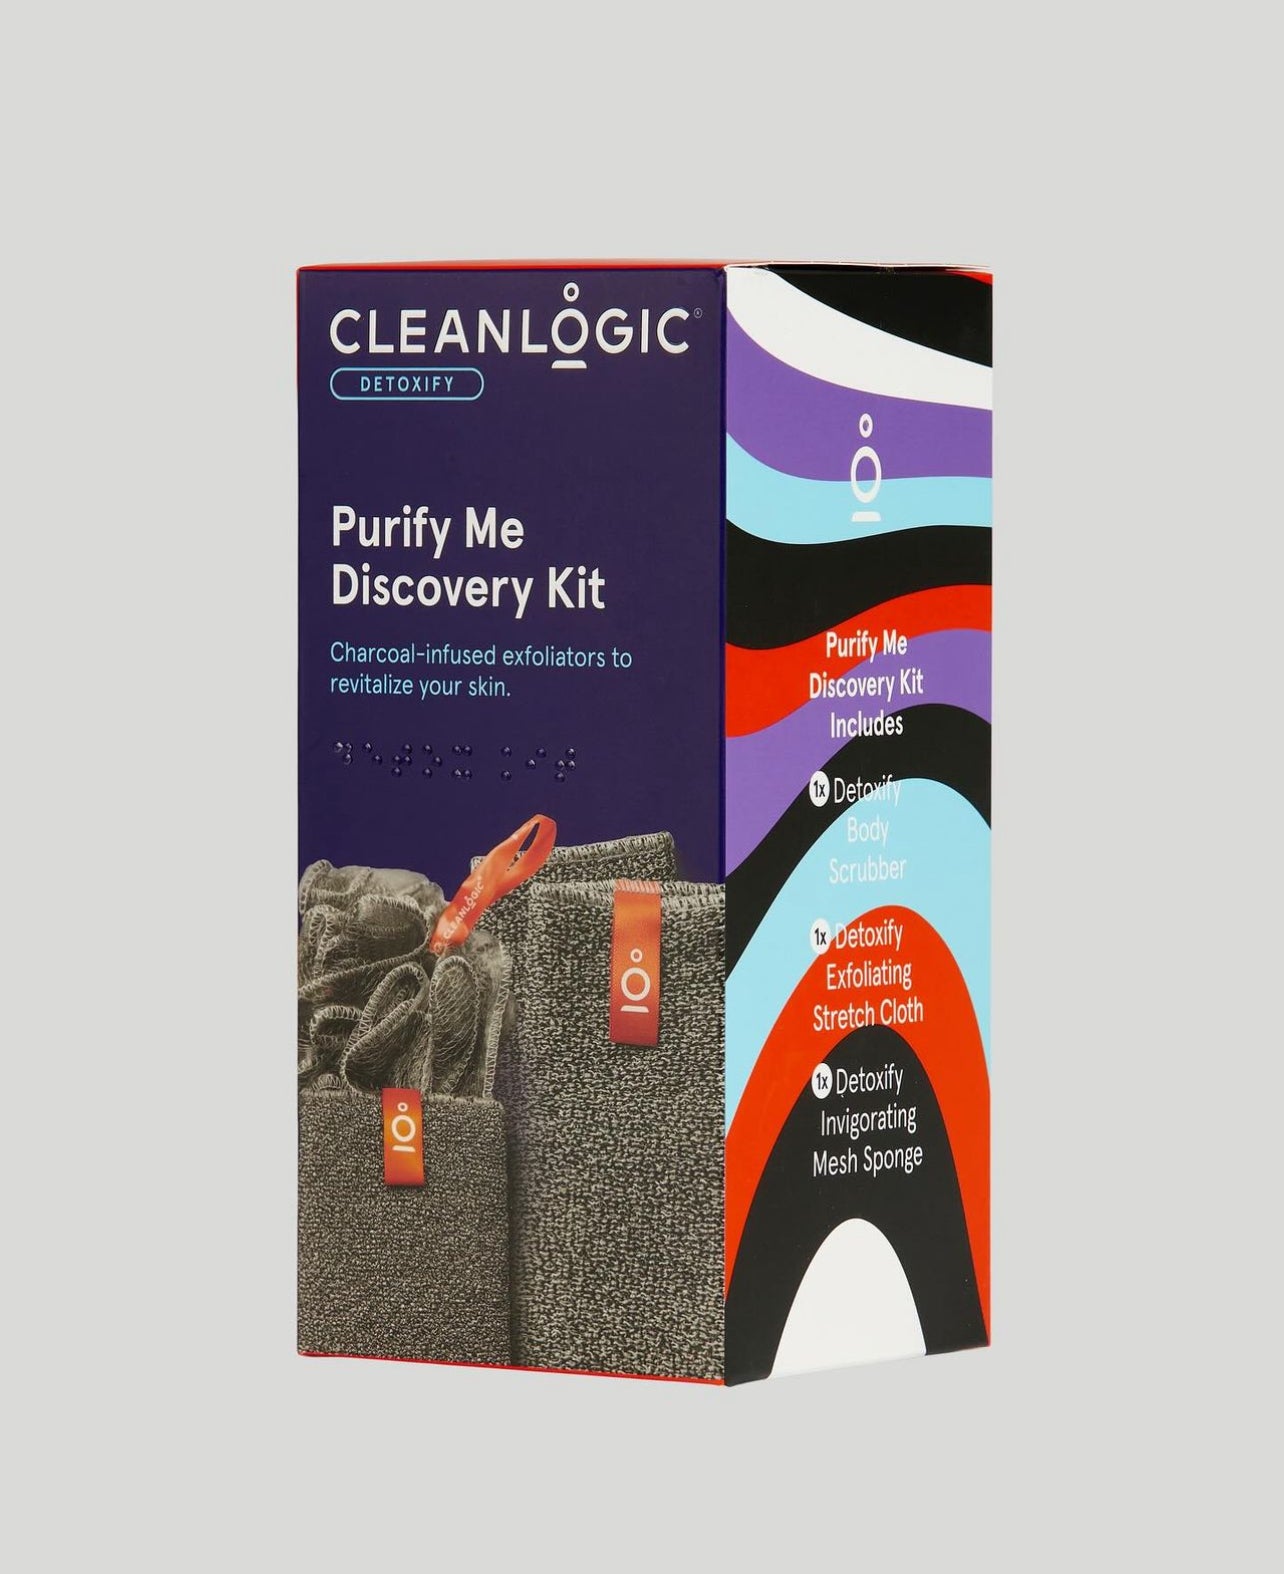 CLEANLOGIC purify me discovery kit